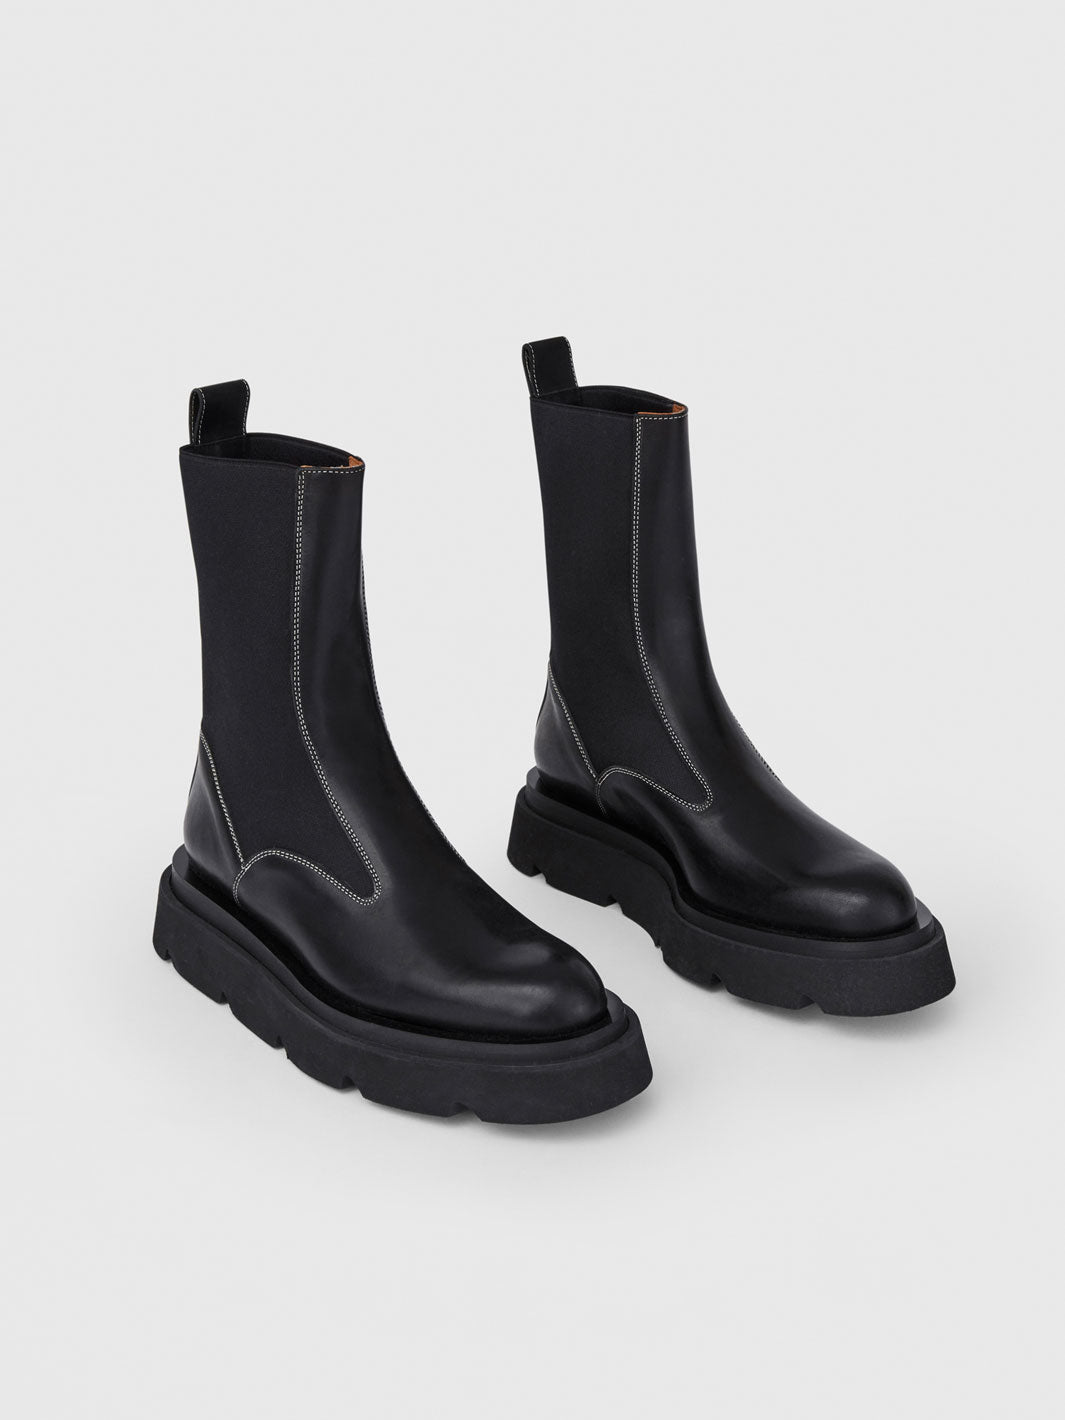 Forge surfing Myre Moncalieri Black/Contrast Stitch Leather Chunky Boots – ATP Atelier